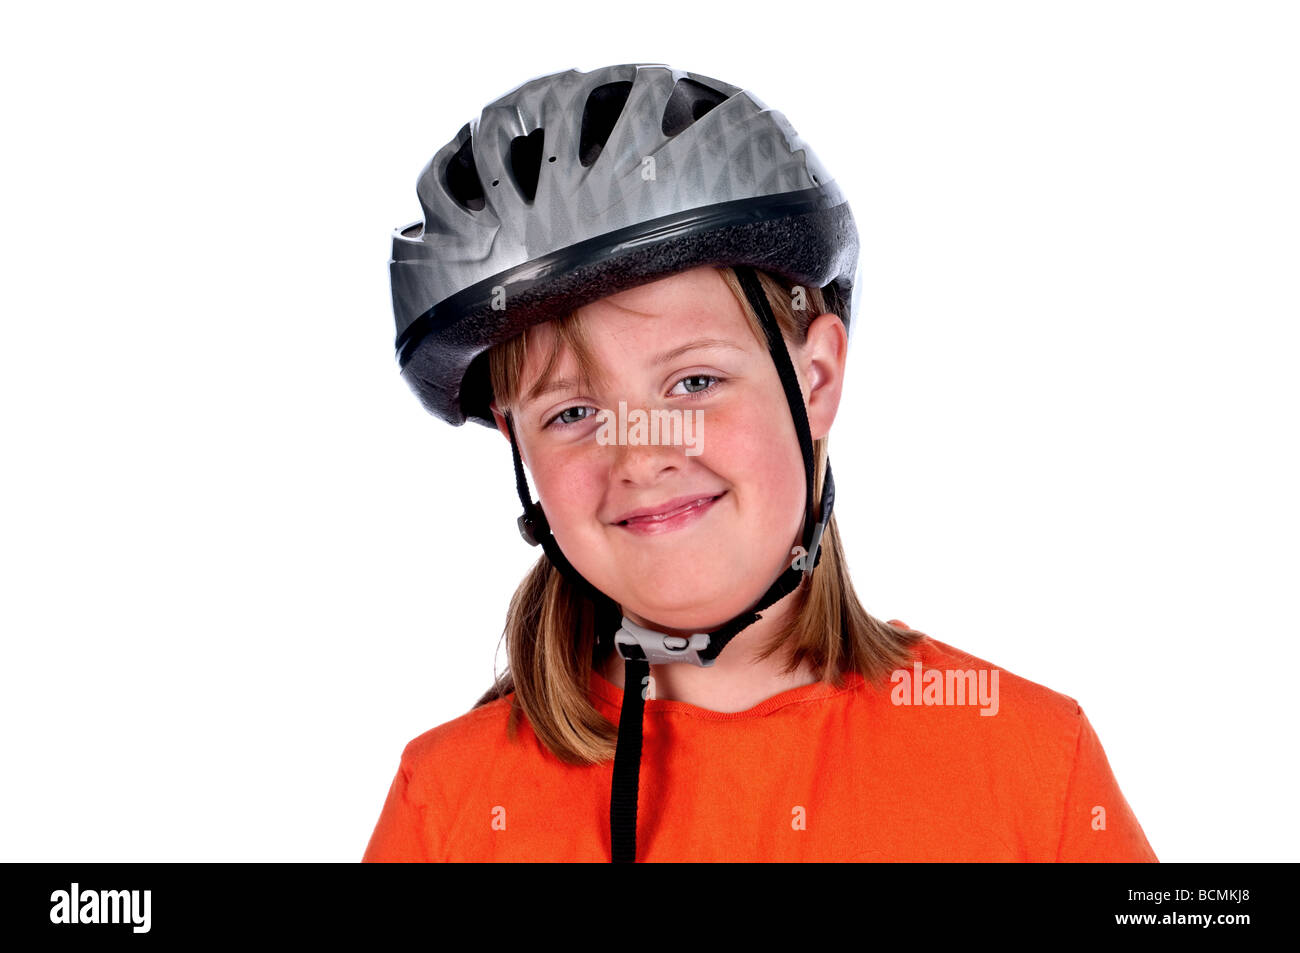 A horiizontal image of a smiling young girl wearing a helmet Stock Photo